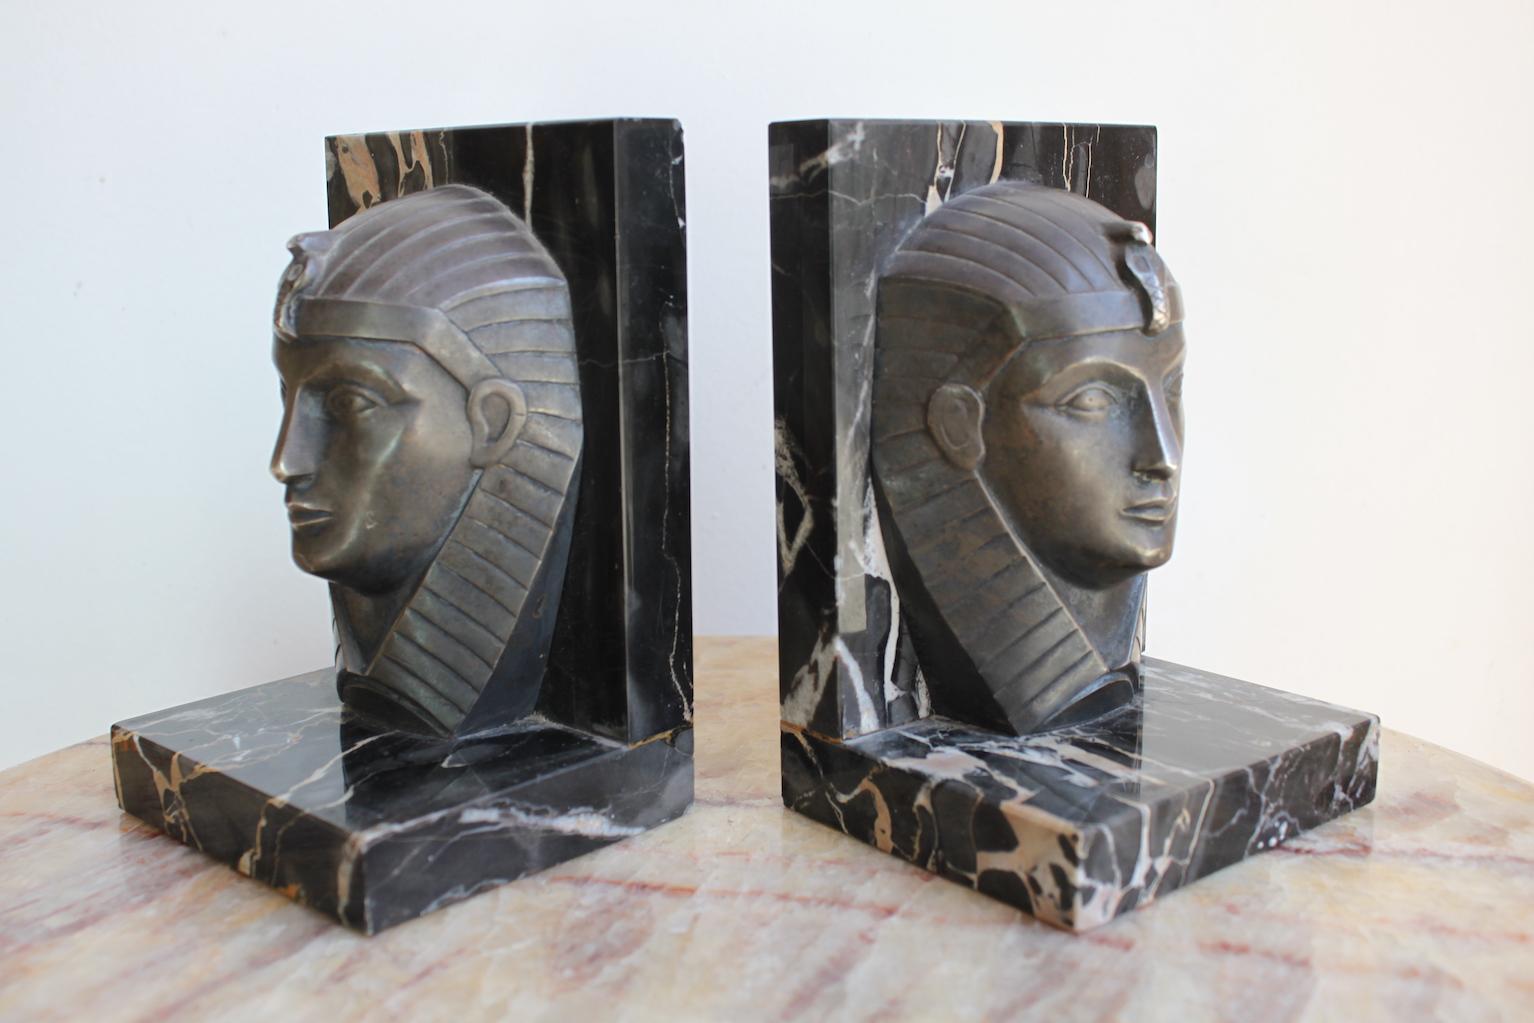 Pair of Art Deco bookends by Charles, 1930, in metal and marble, representing two pharaoh heads
Signed.
Dimensions: Width 10cm, height 14.5 cm, depth 8.5 cm.